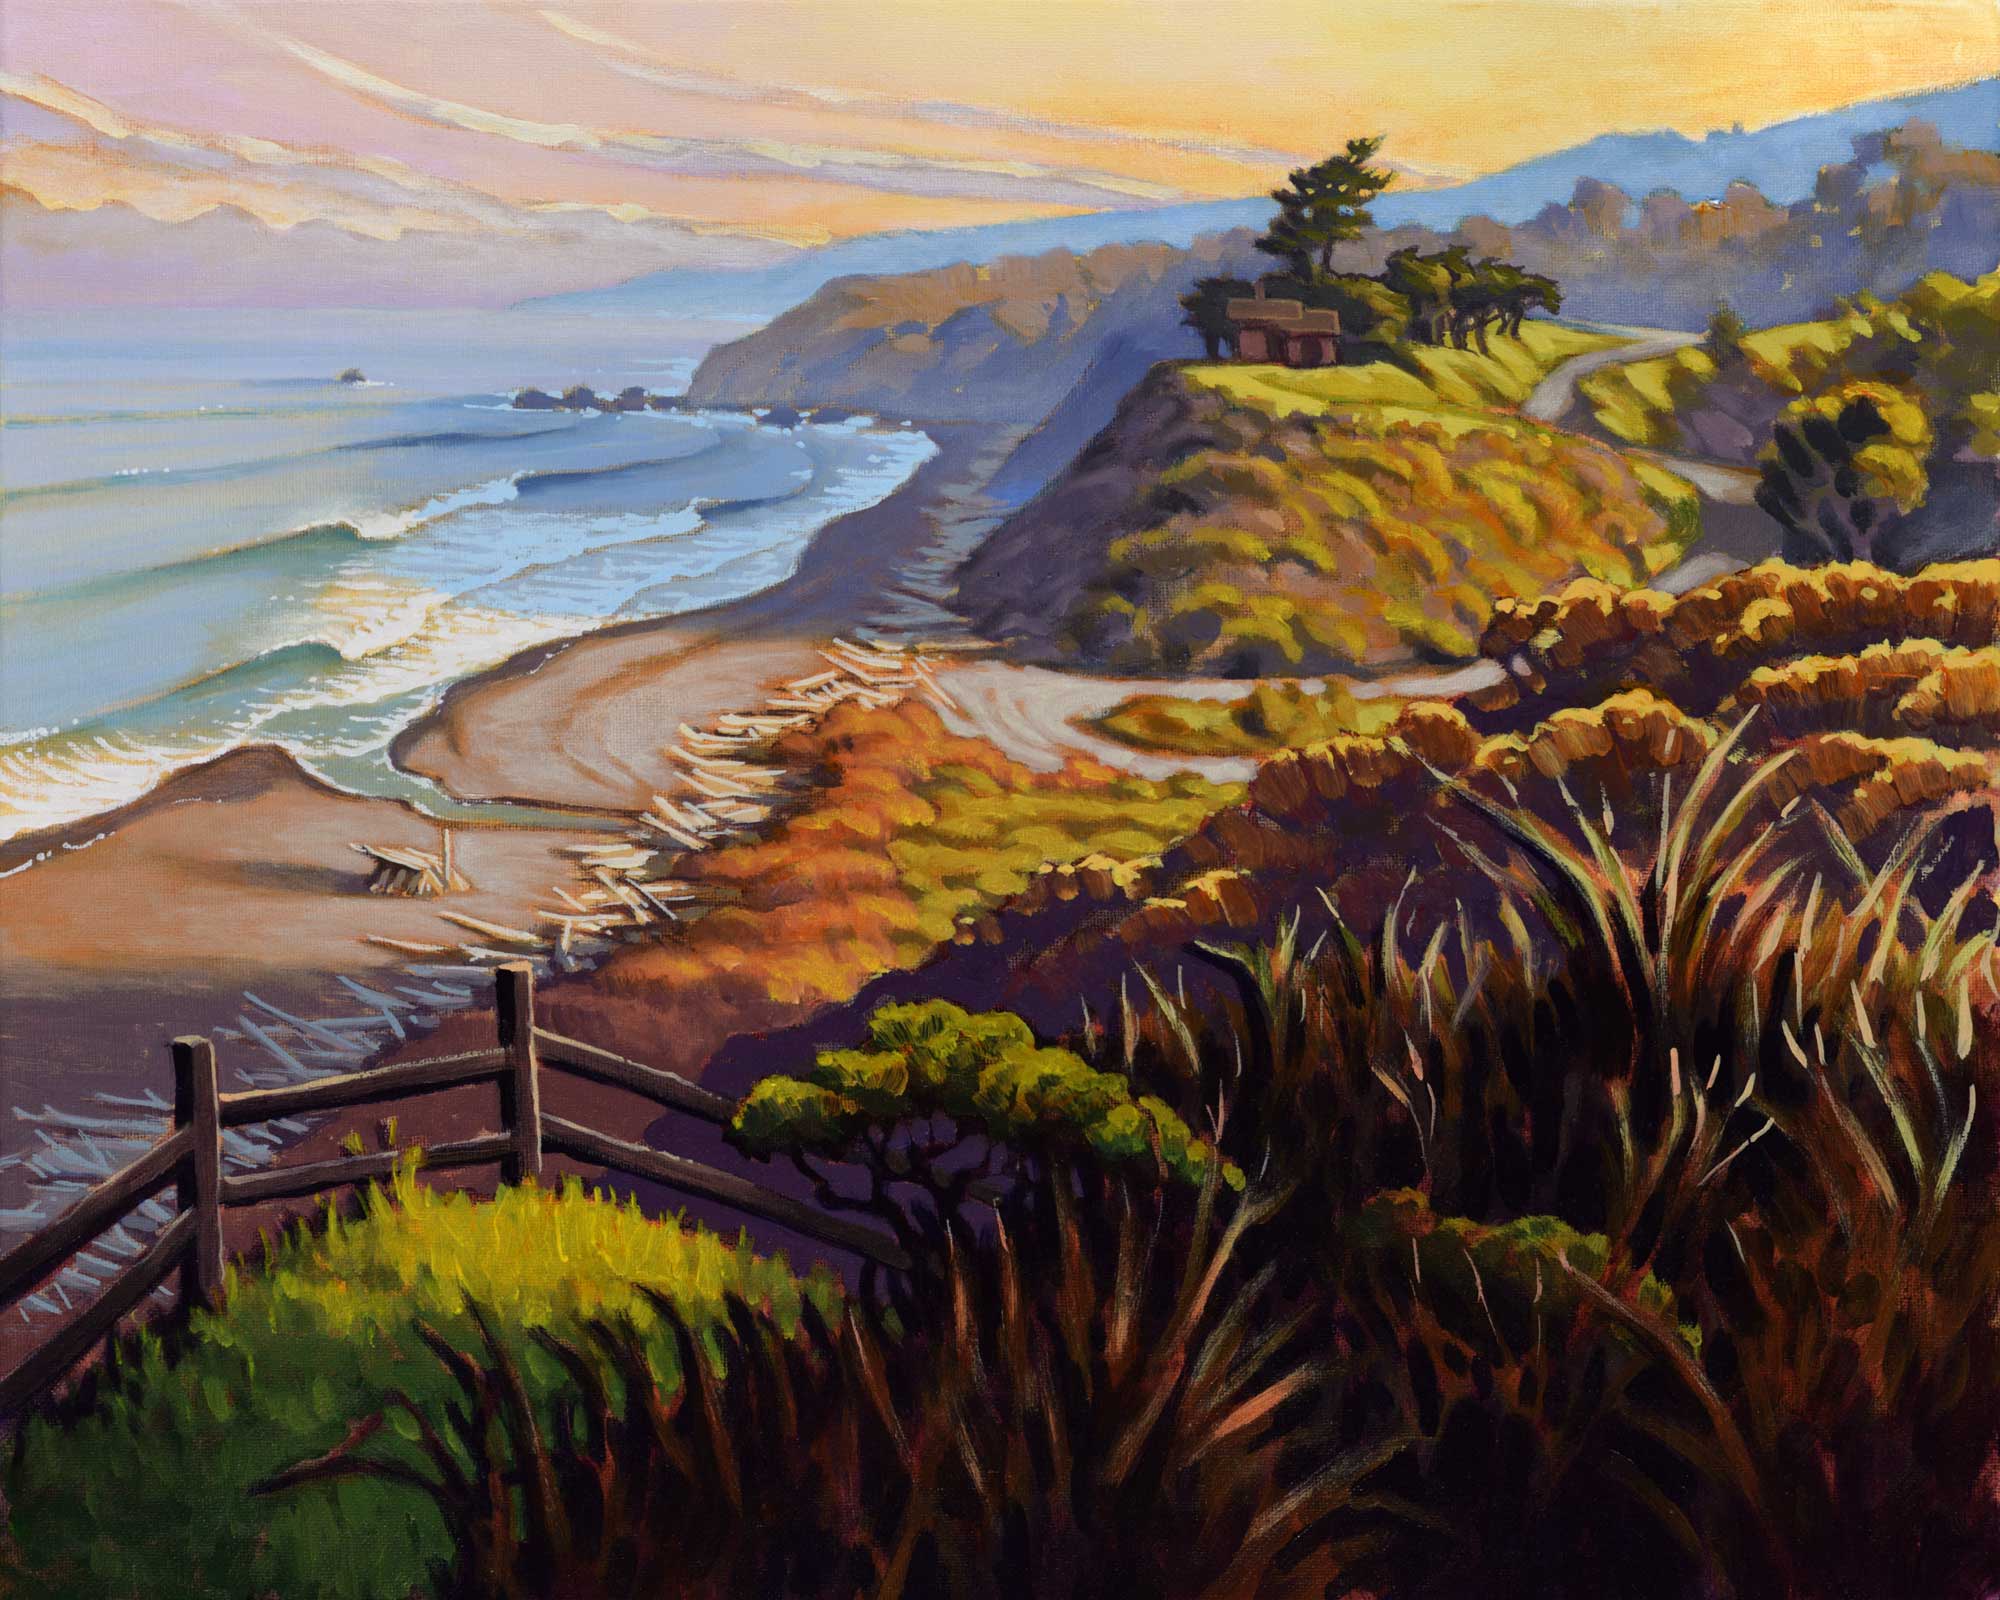 A painting of the view overlooking Irish Beach on a clear morning on the Mendocino coast of northern California